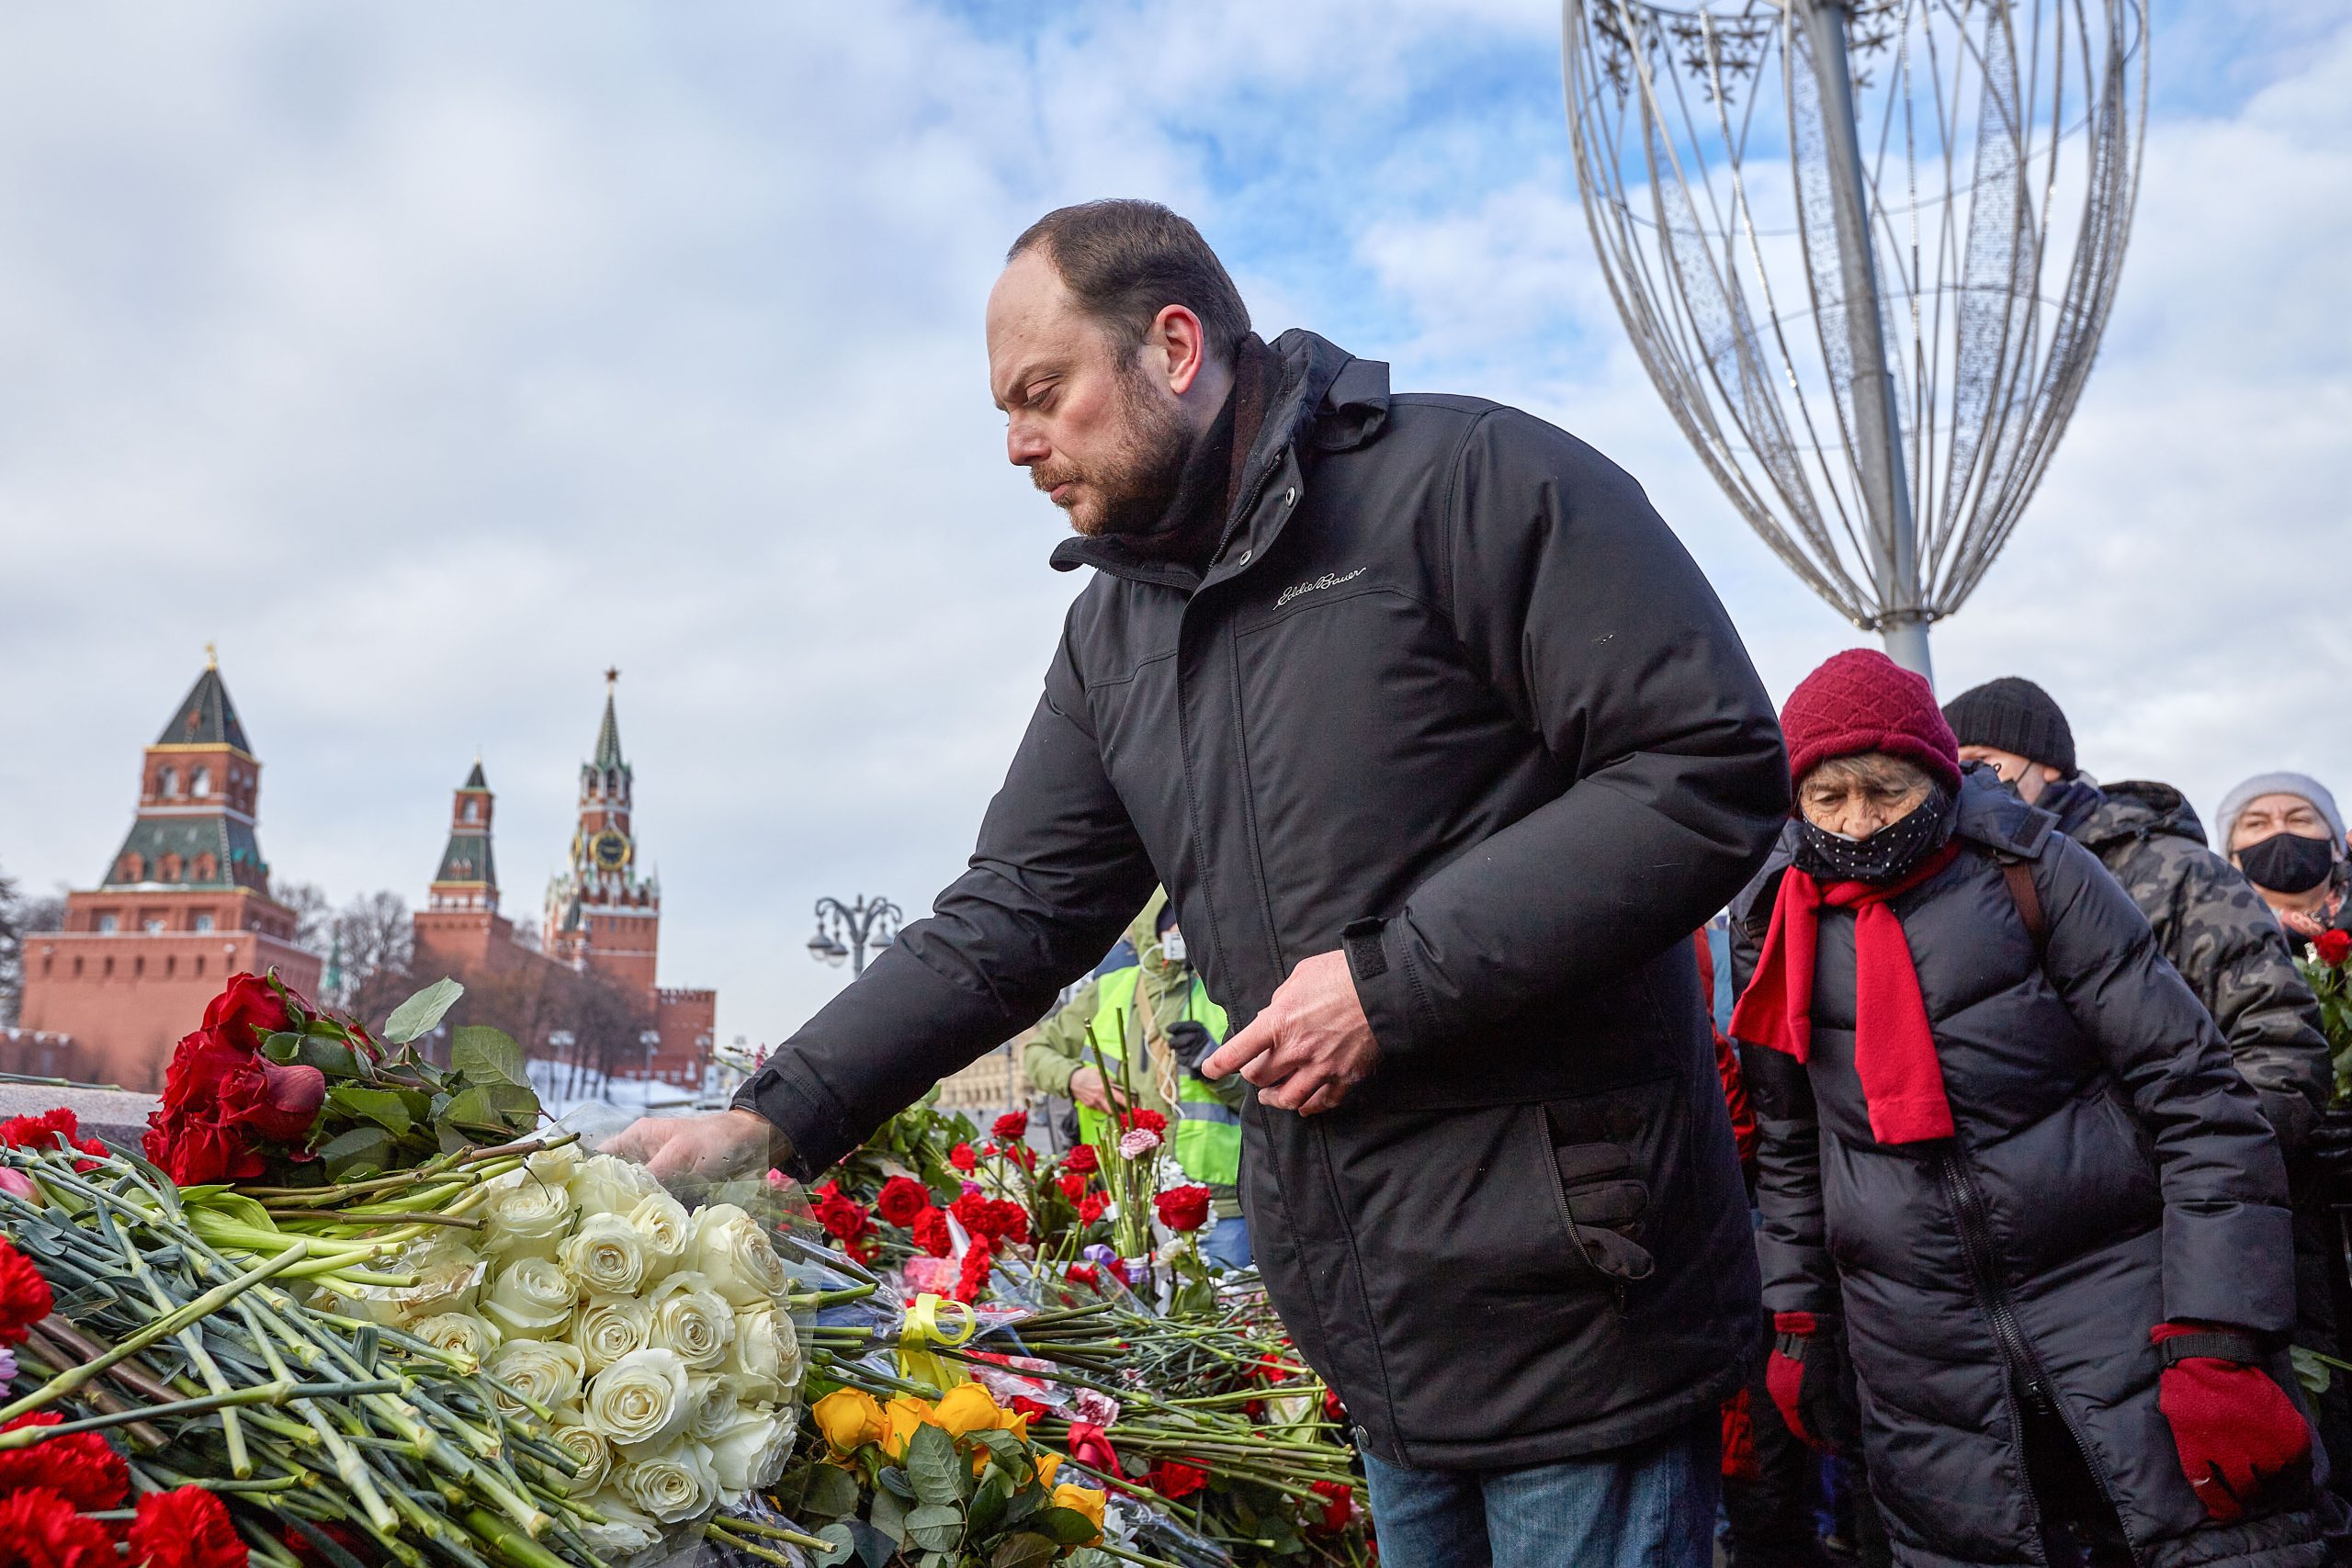 Photo: Opposition politician Vladimir Kara-Murza laying flowers during the memorial. More than 10 thousand people took part in the memory of Boris Nemtsov on the sixth anniversary of the murder of the politician. Credit: Mihail Siergiejevicz / SOPA Imag/Sipa USA